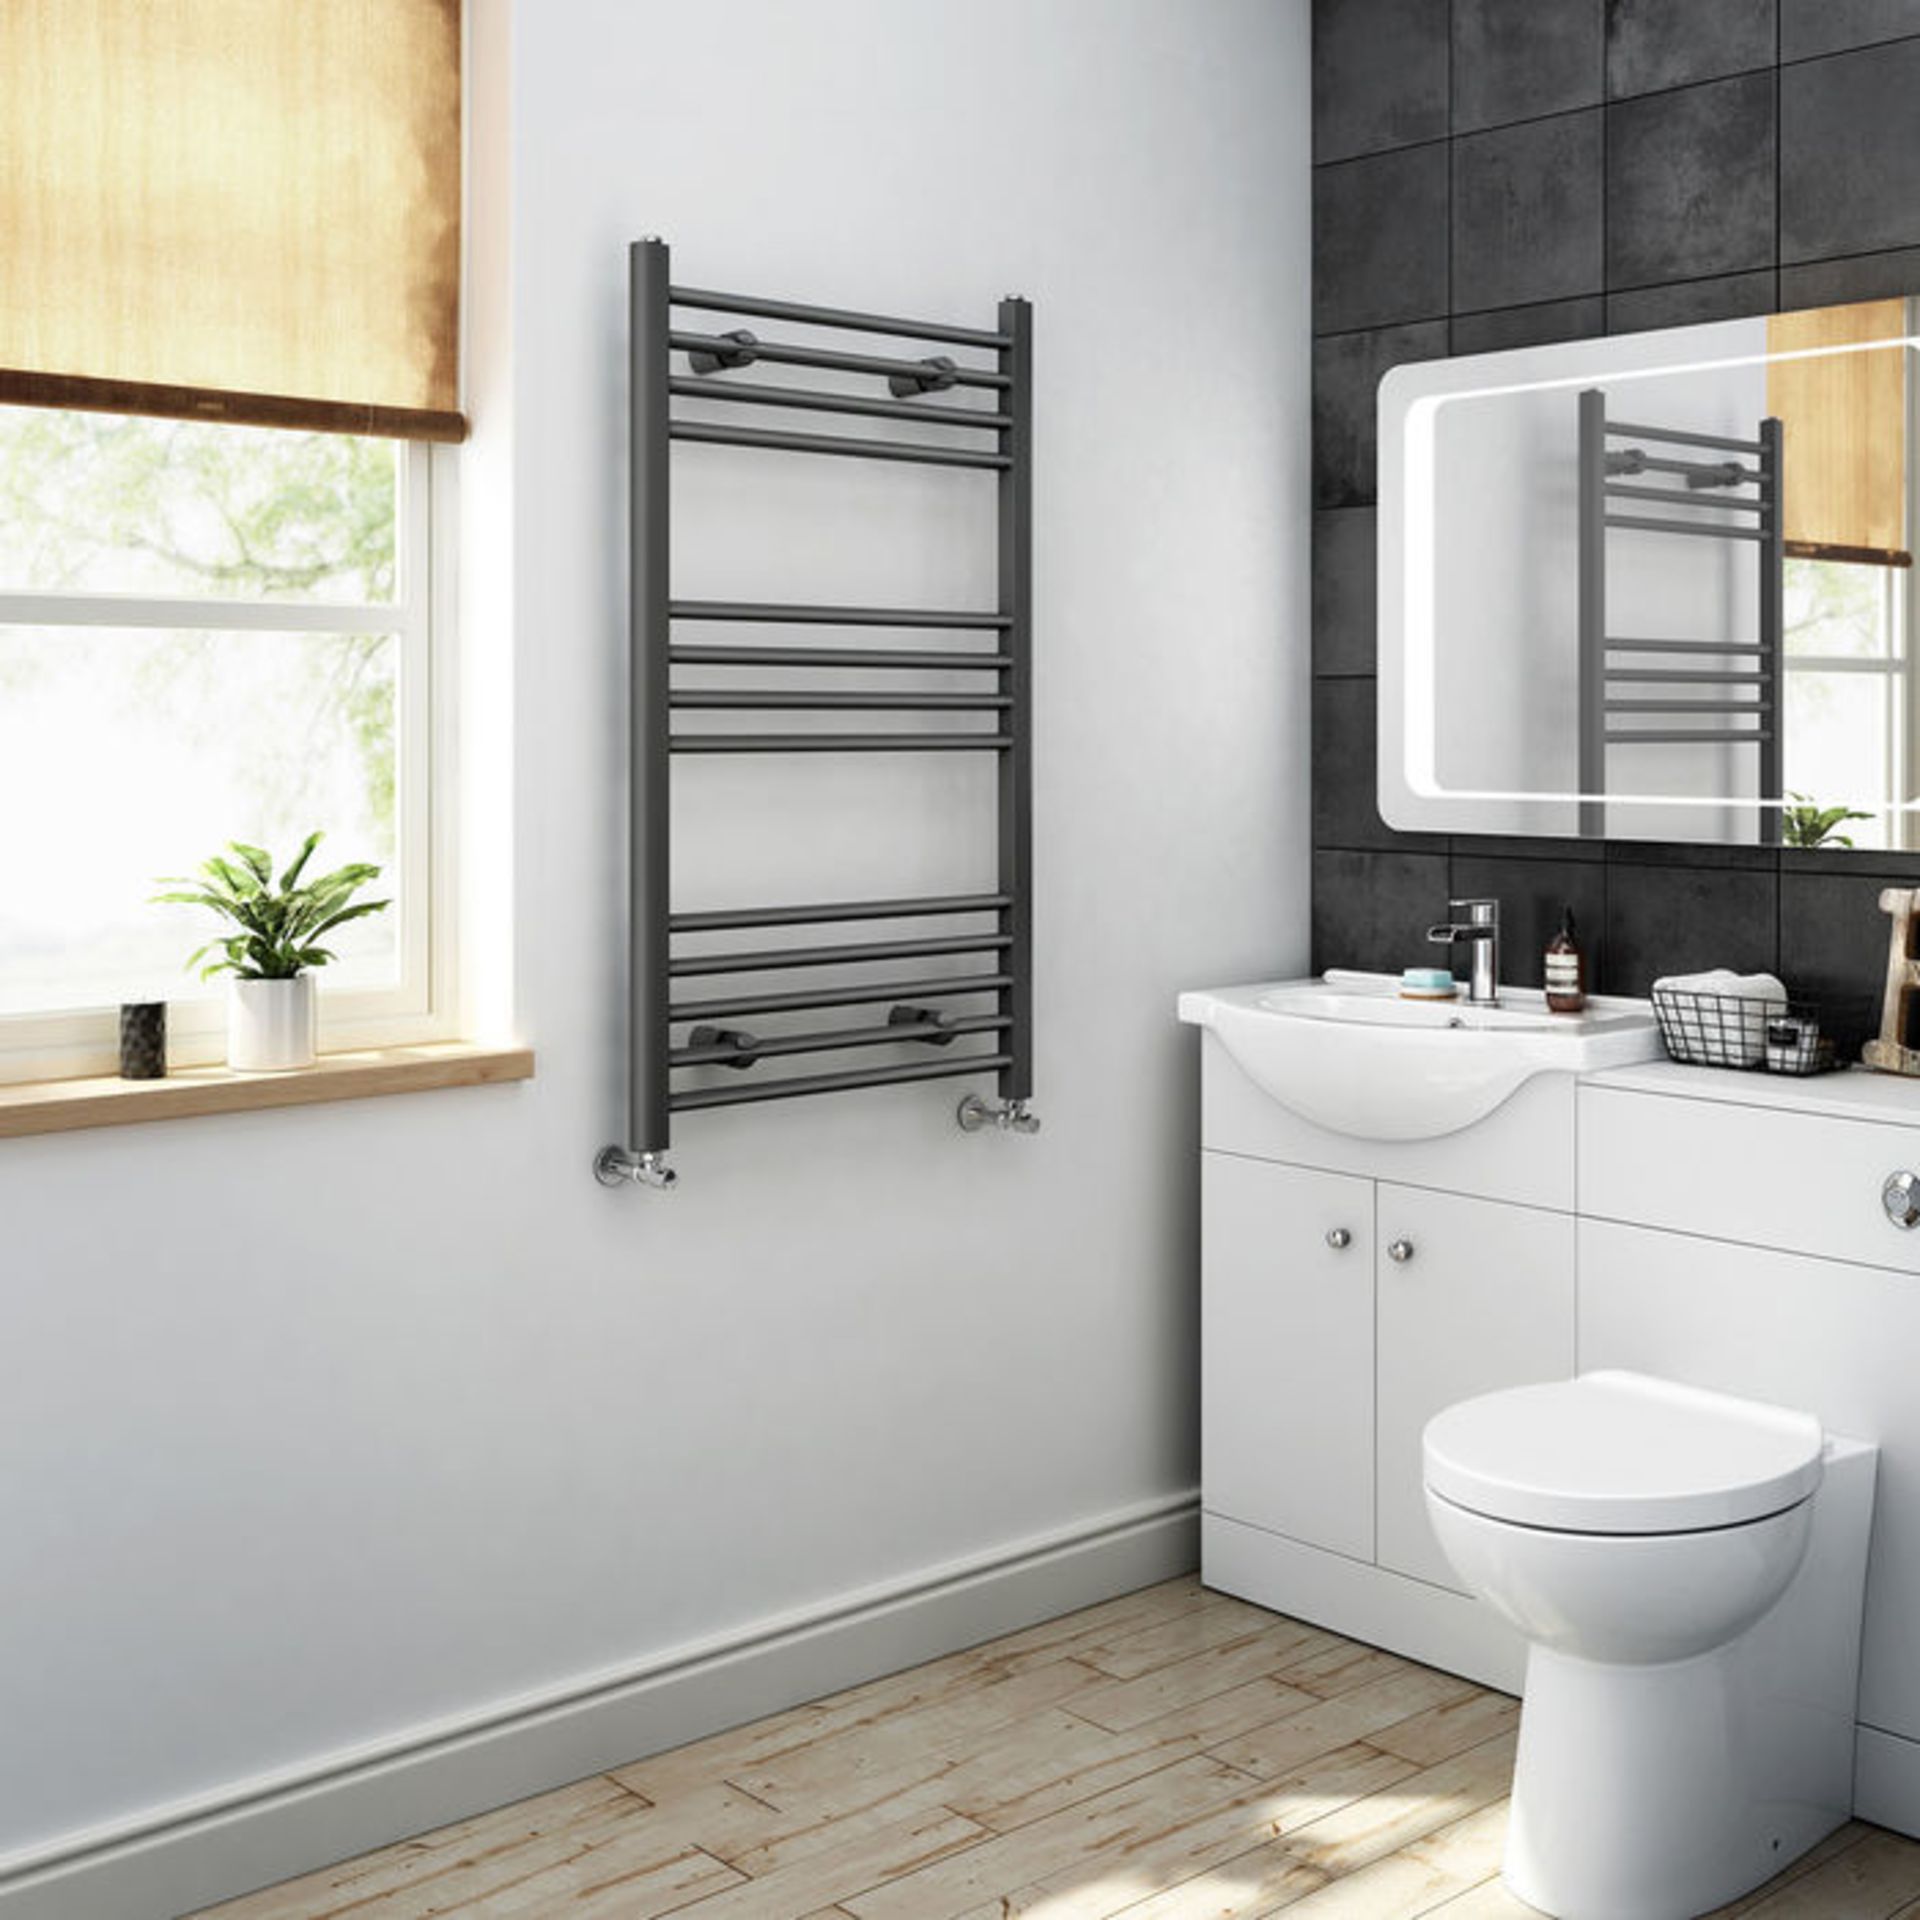 (DW251) 1000x600mm - 20mm Tubes - Anthracite Heated Straight Rail Ladder Towel Radiator. RRP £... - Image 2 of 3